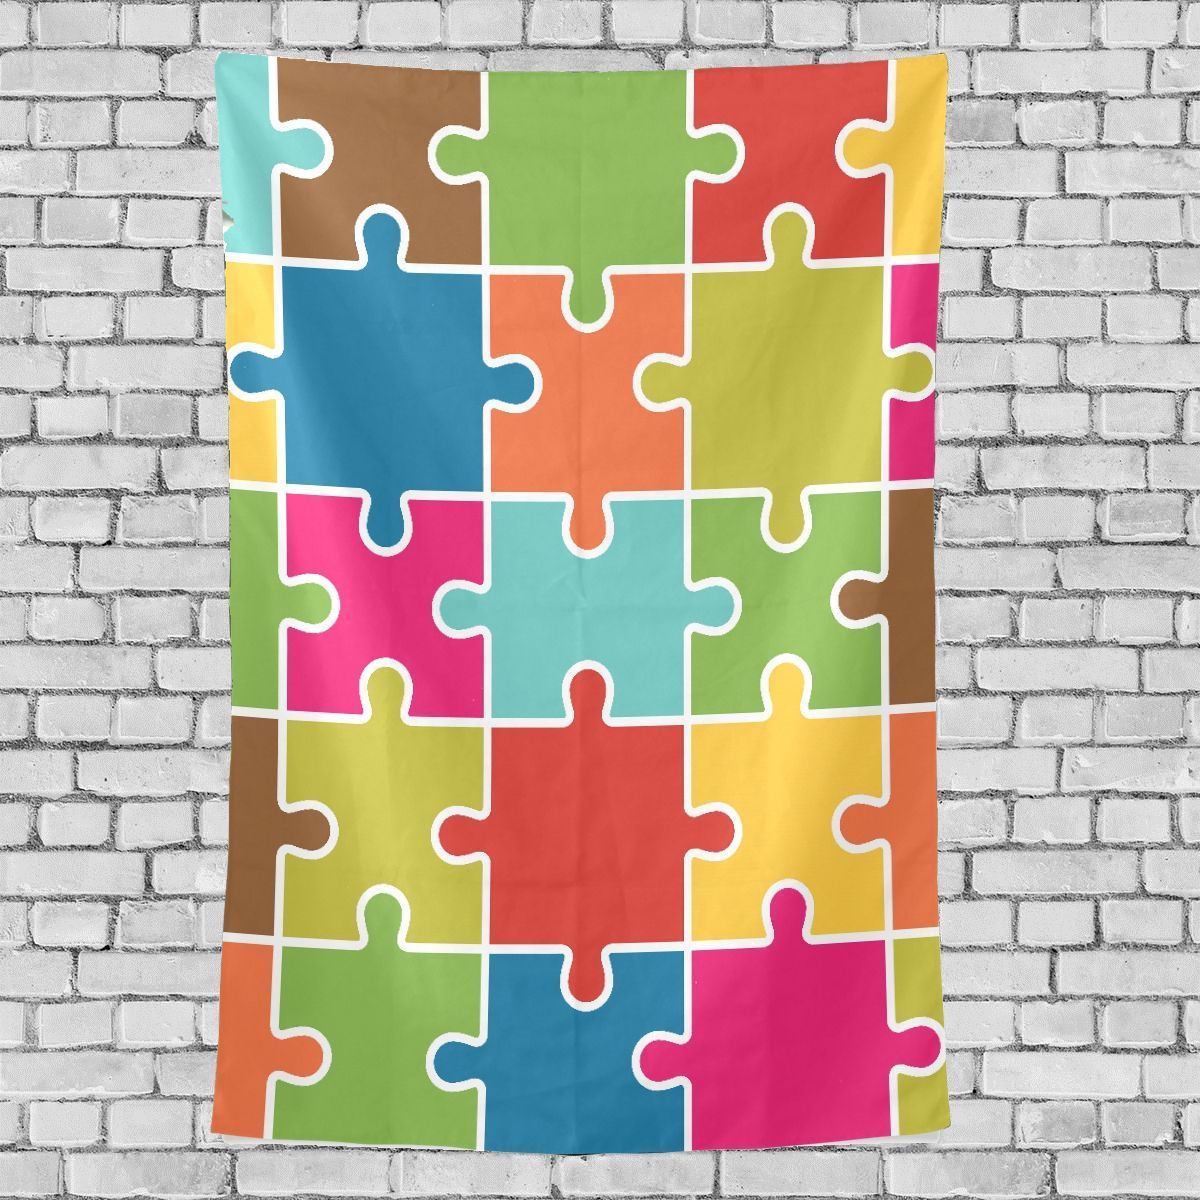 Farmhouse Wall Decor Difficult Endless Jigsaw Puzzle Pieces Pattern Pertaining To Most Popular Puzzle Wall Art (View 13 of 20)